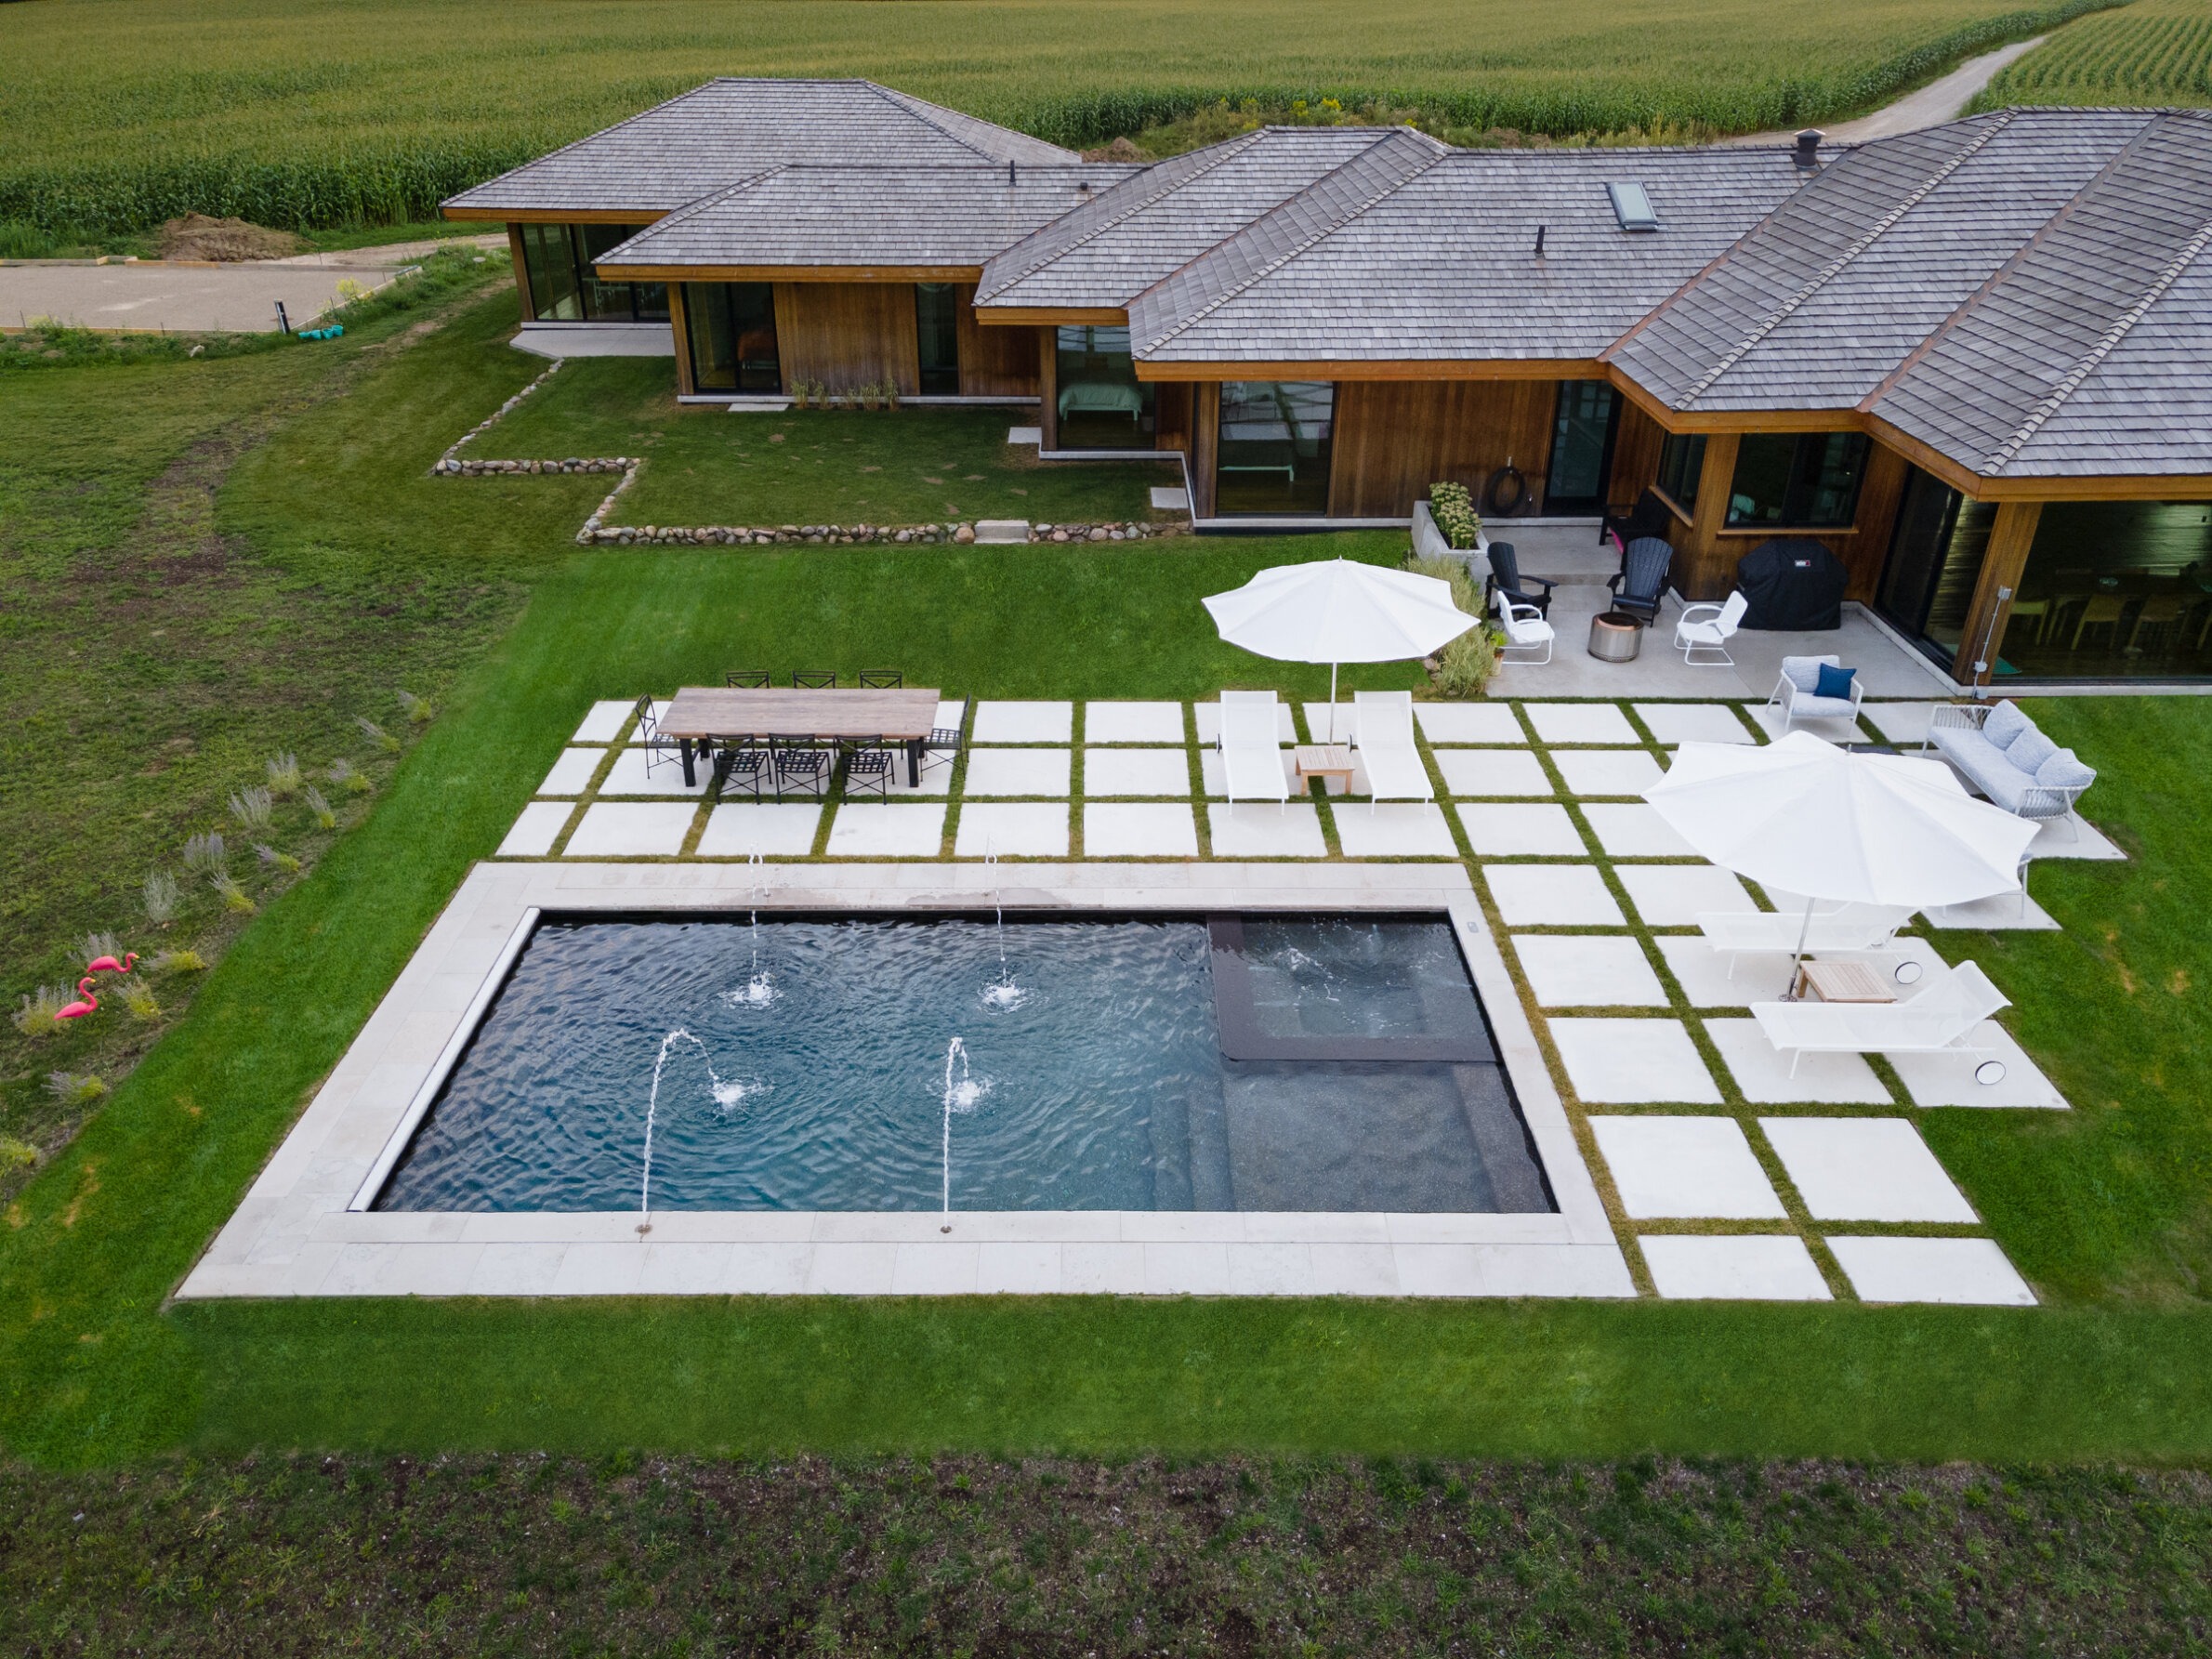 Aerial view of a modern house with a rectangular pool, outdoor seating, umbrellas, surrounded by green lawns and adjacent farmland.